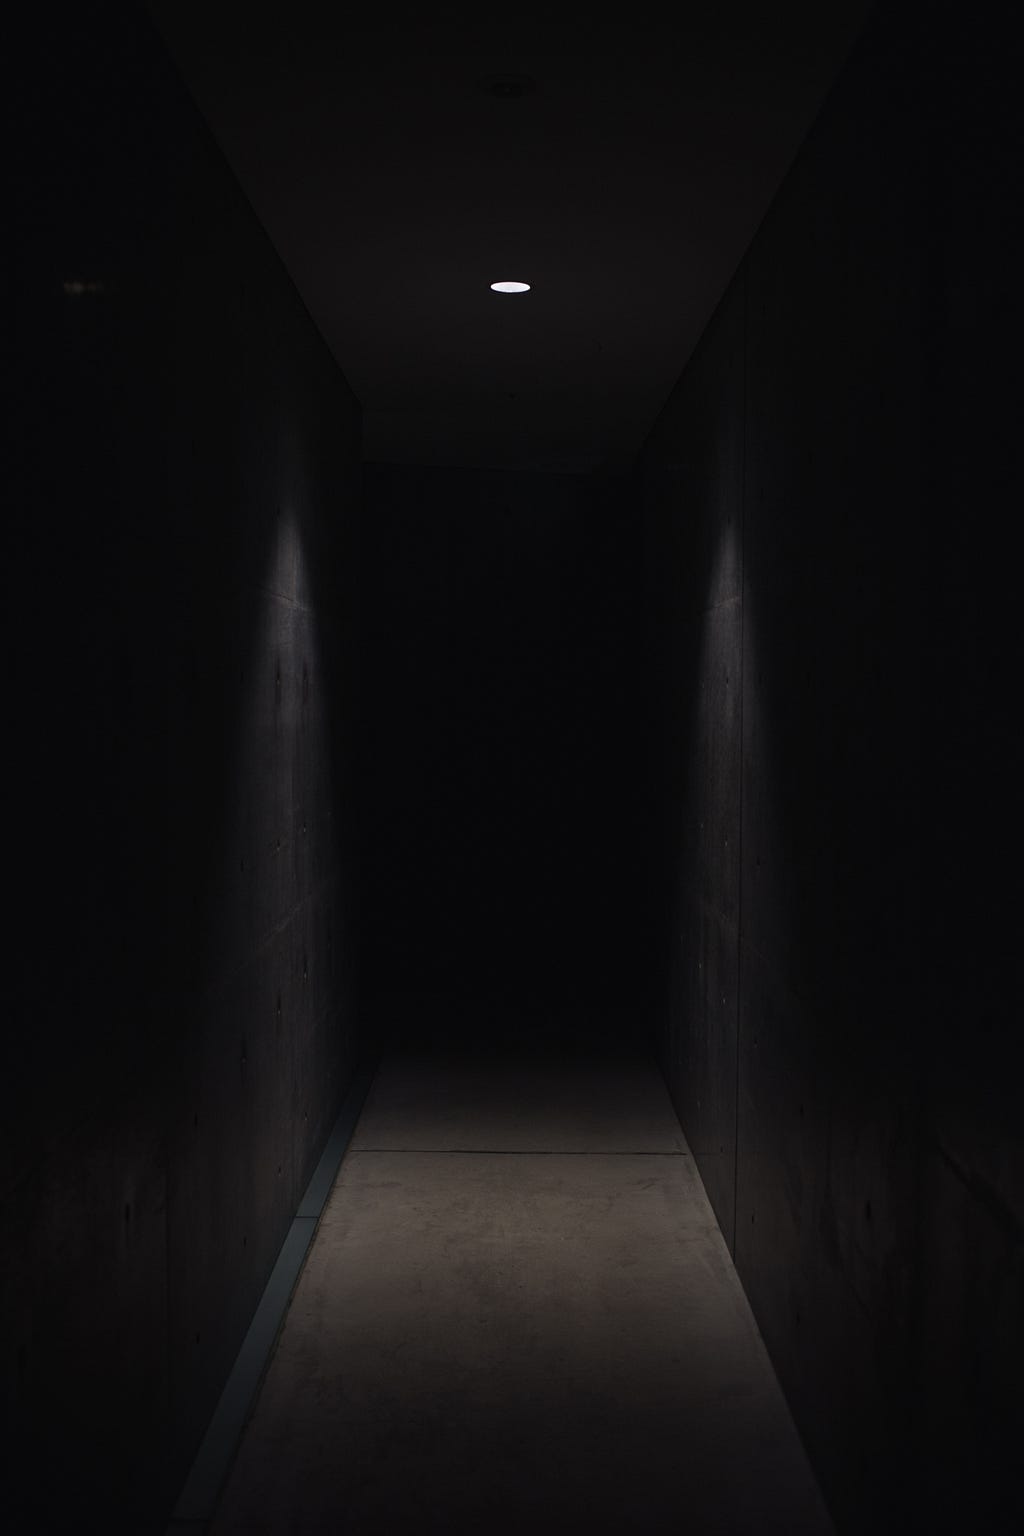 A dark hallway, lit by a solitary ceiling lamp.